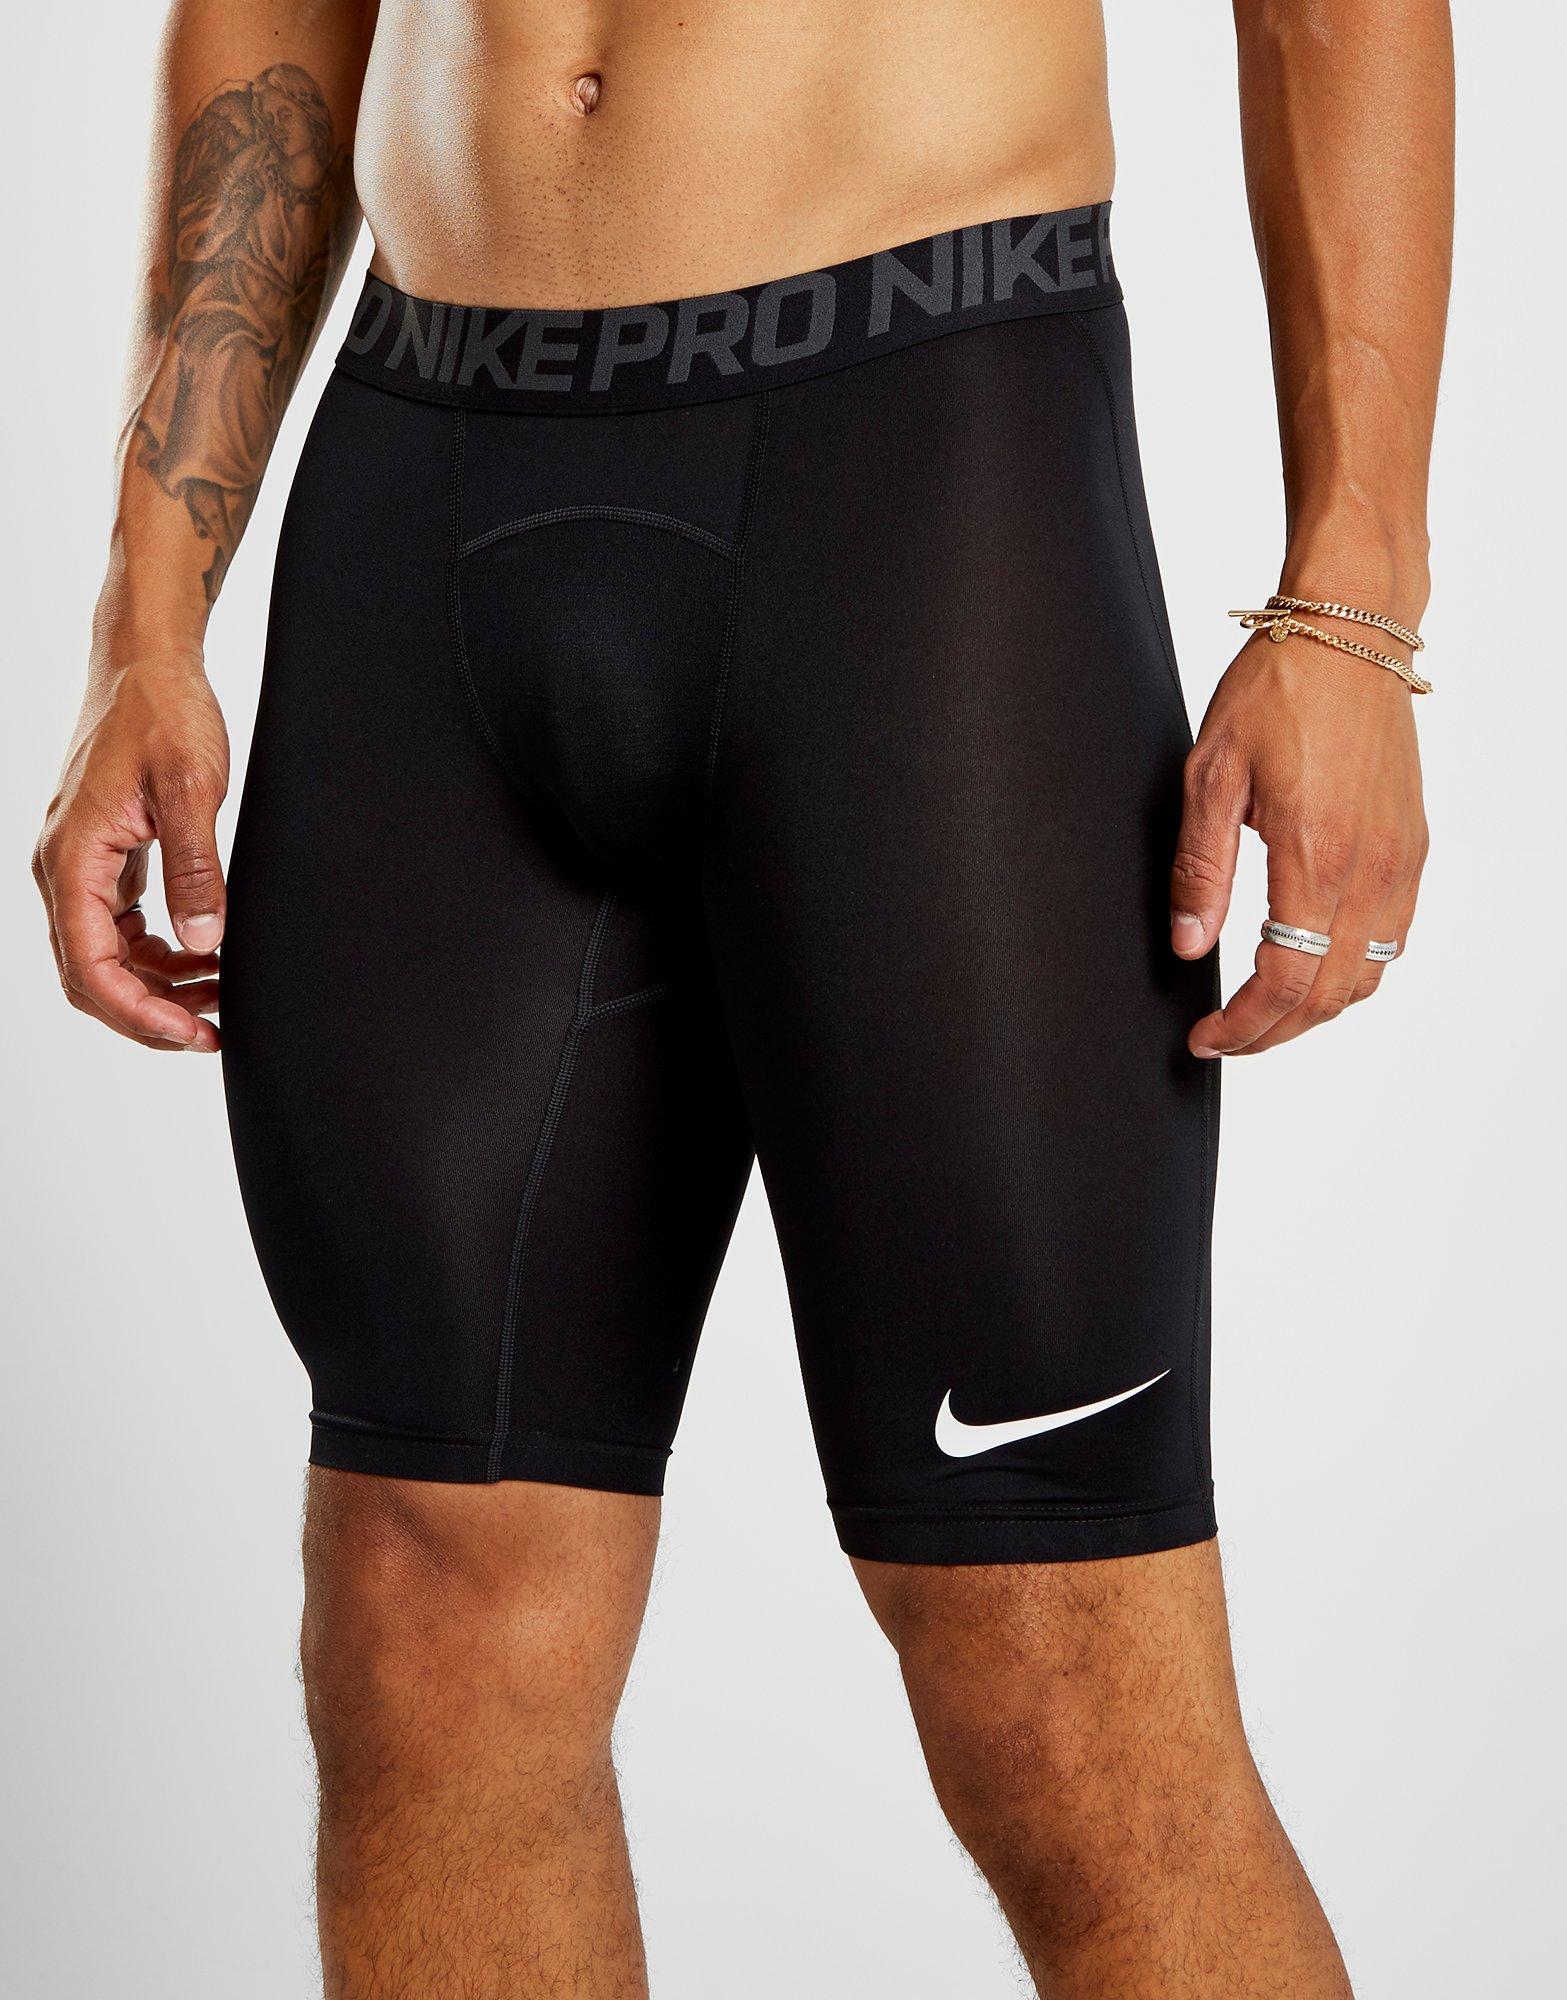 Lyst - Nike Pro 9 Inch Compression Shorts in Black for Men